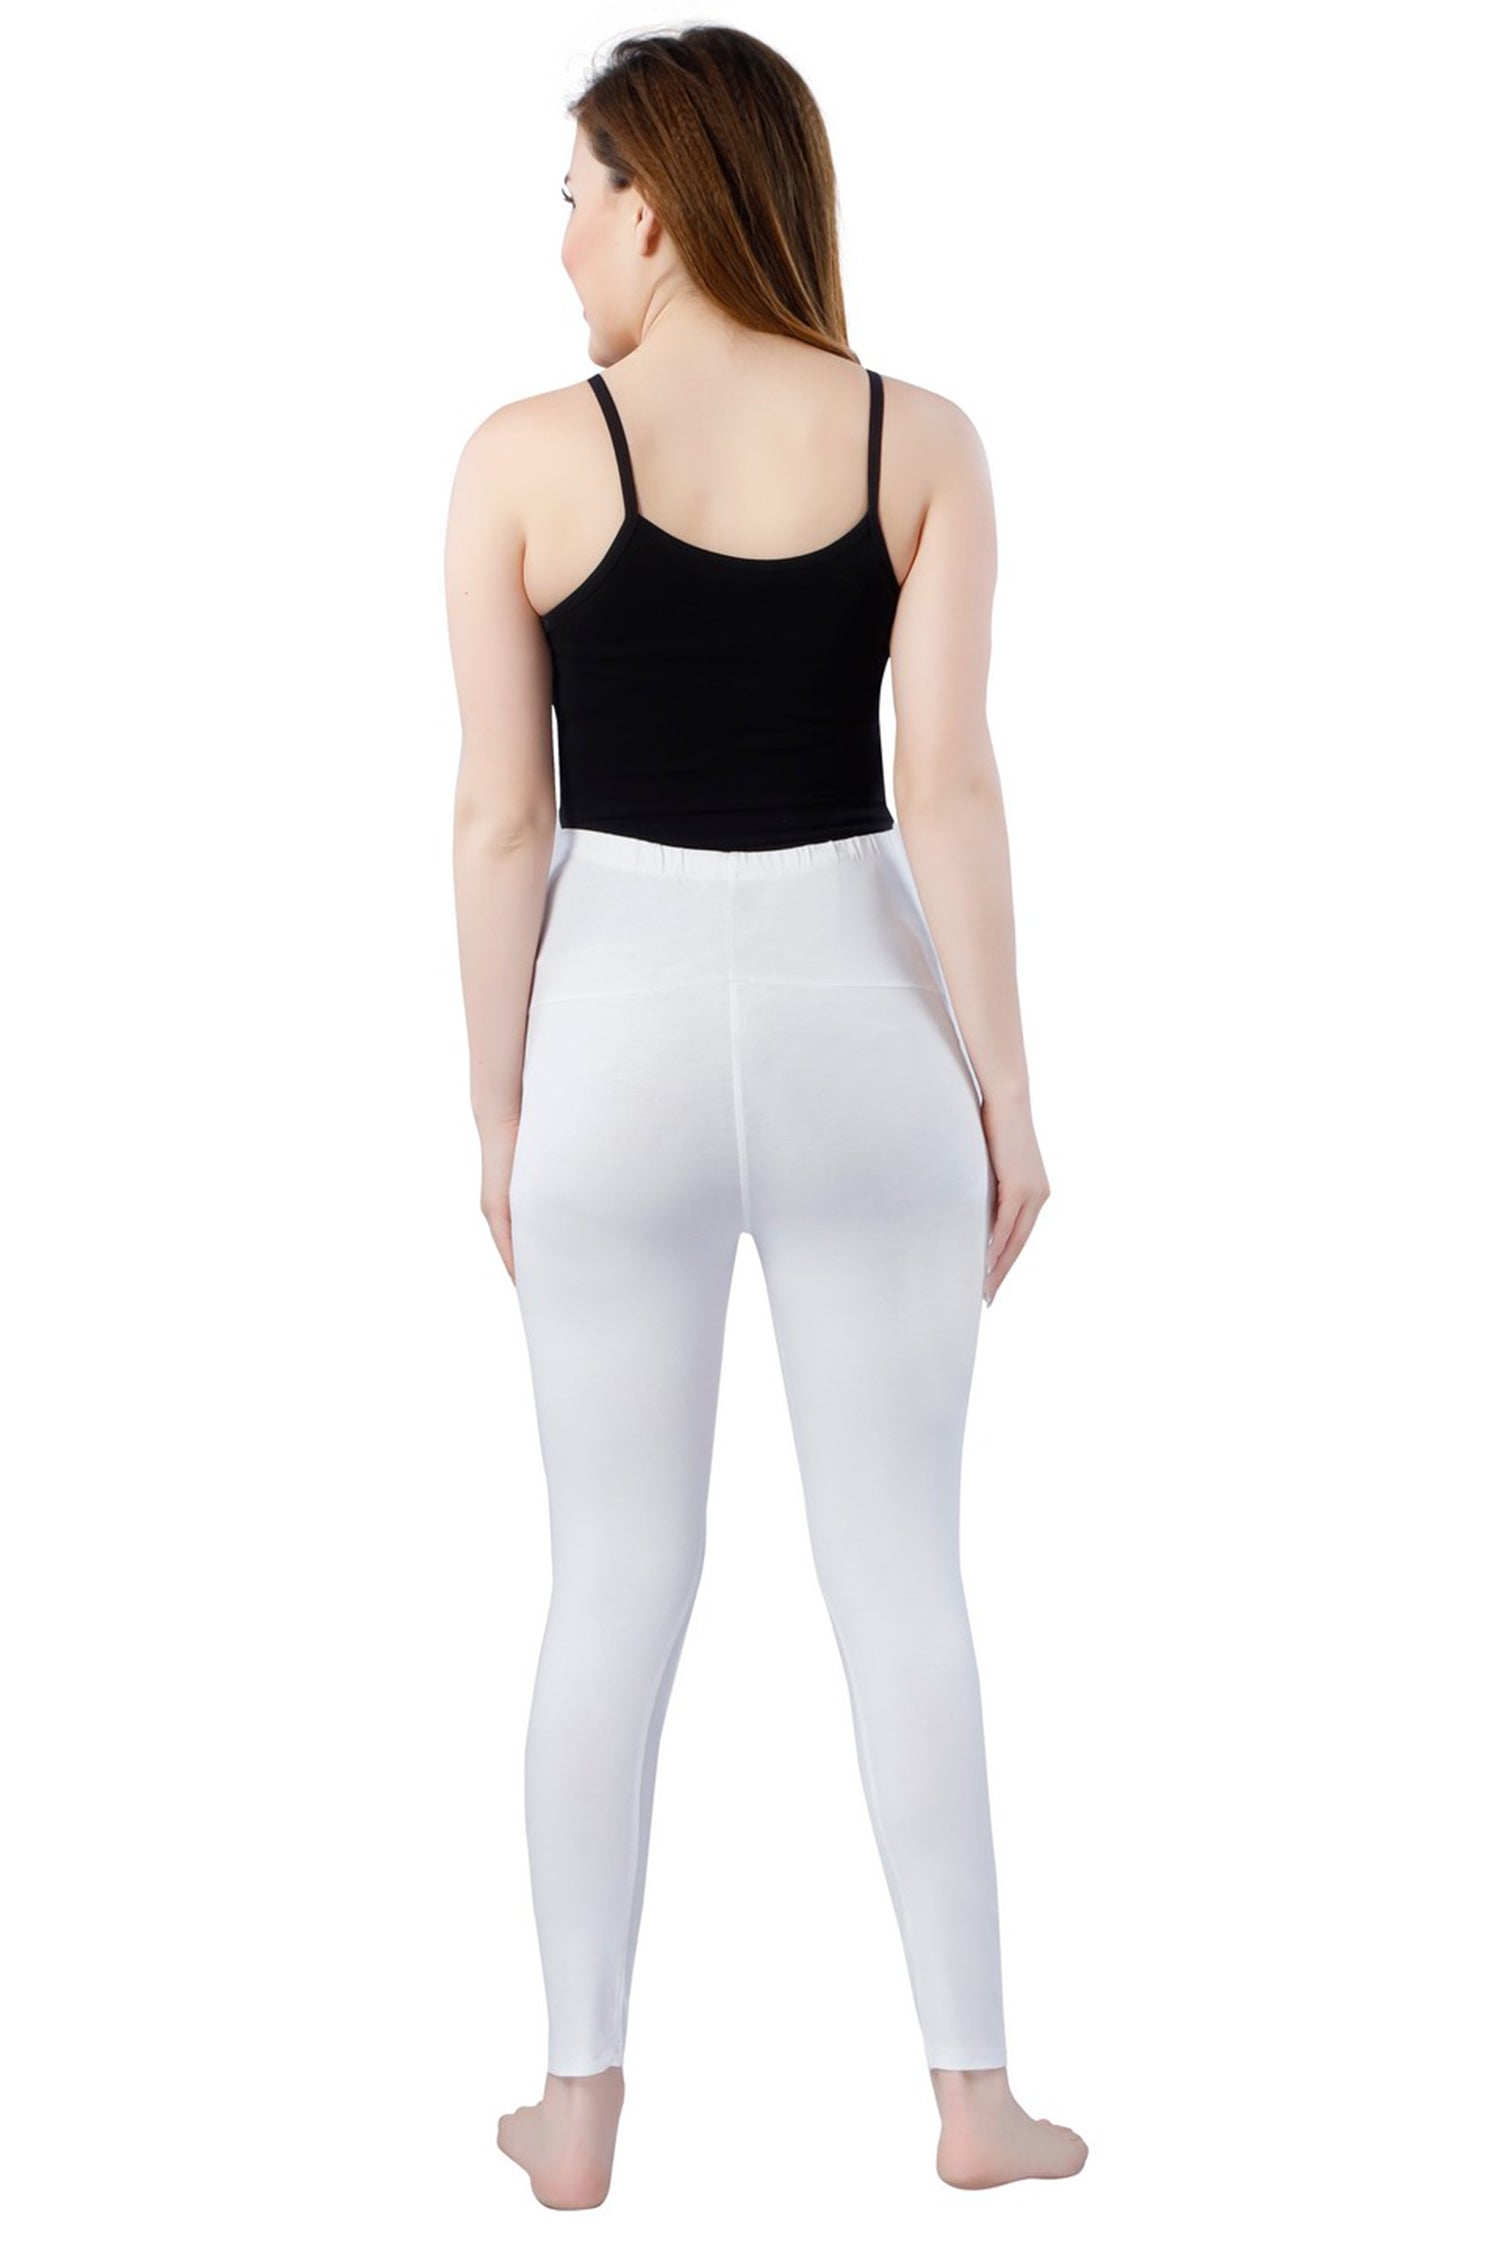 TRASA Women's Maternity Cotton Workout Leggings Over The Belly Pregnancy  Yoga Pants with Pockets - White